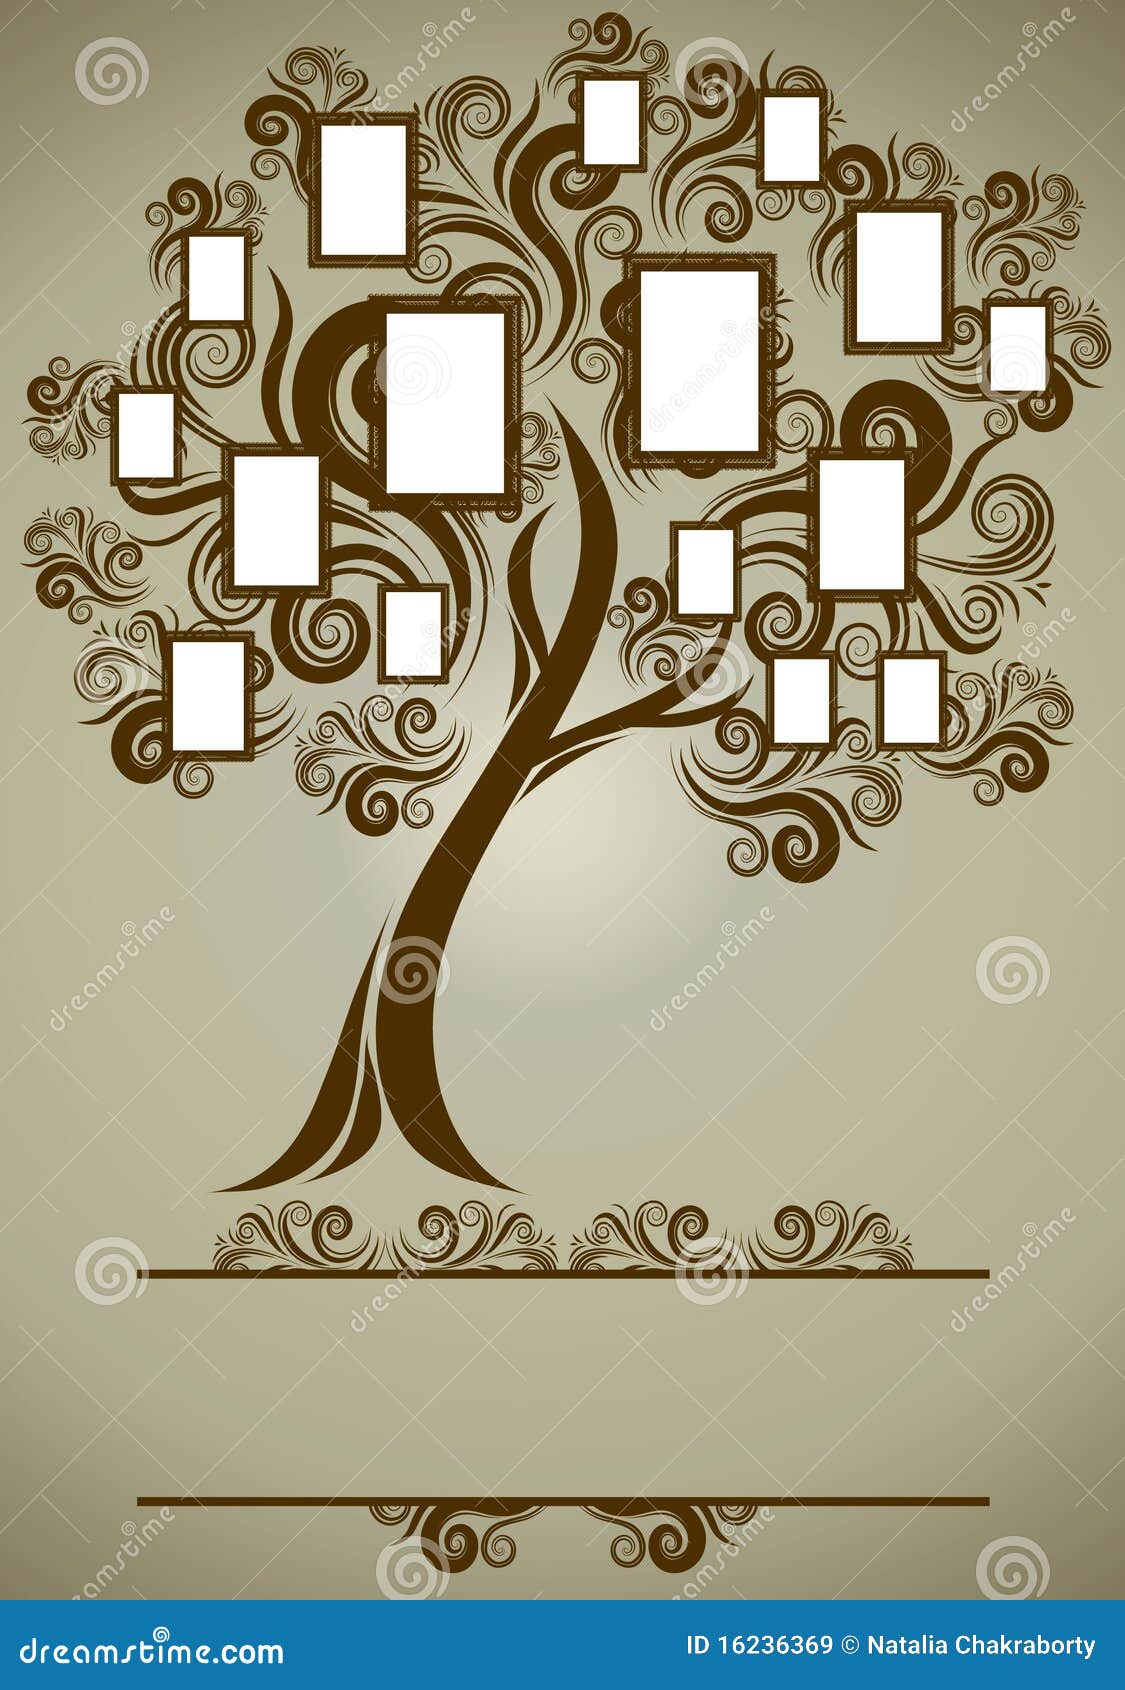 Vector Family Tree Design with Frames Stock Vector - Illustration ...